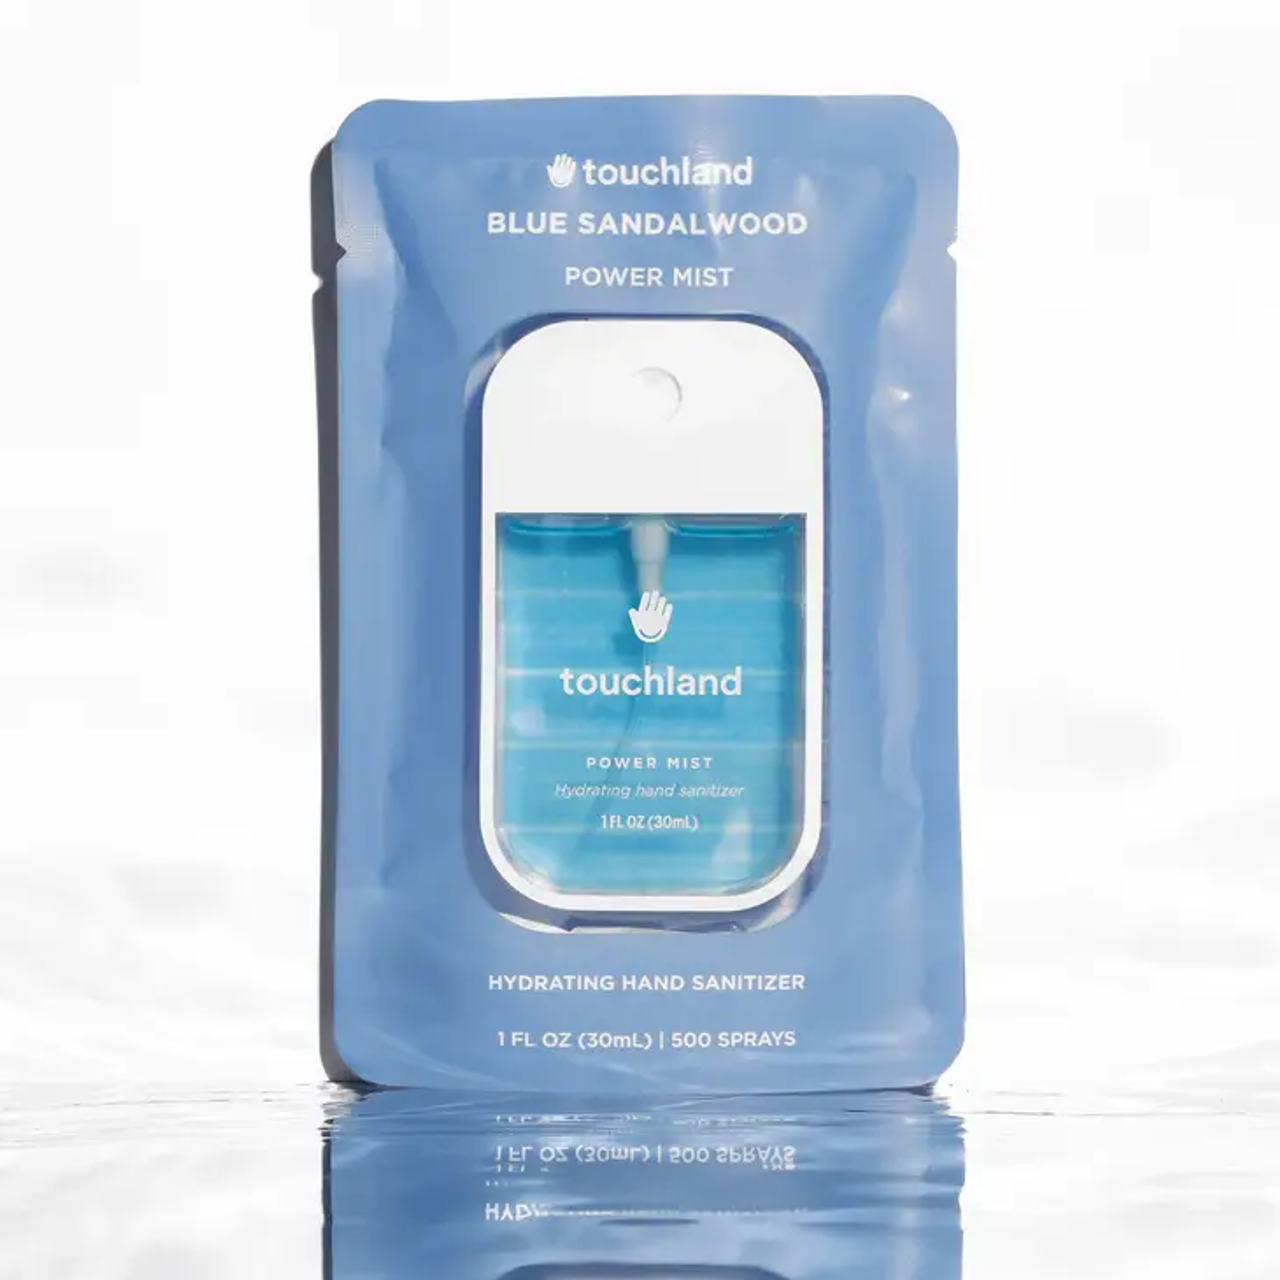 Touchland Power Mist Blue Sandalwood ( Case Not Included )